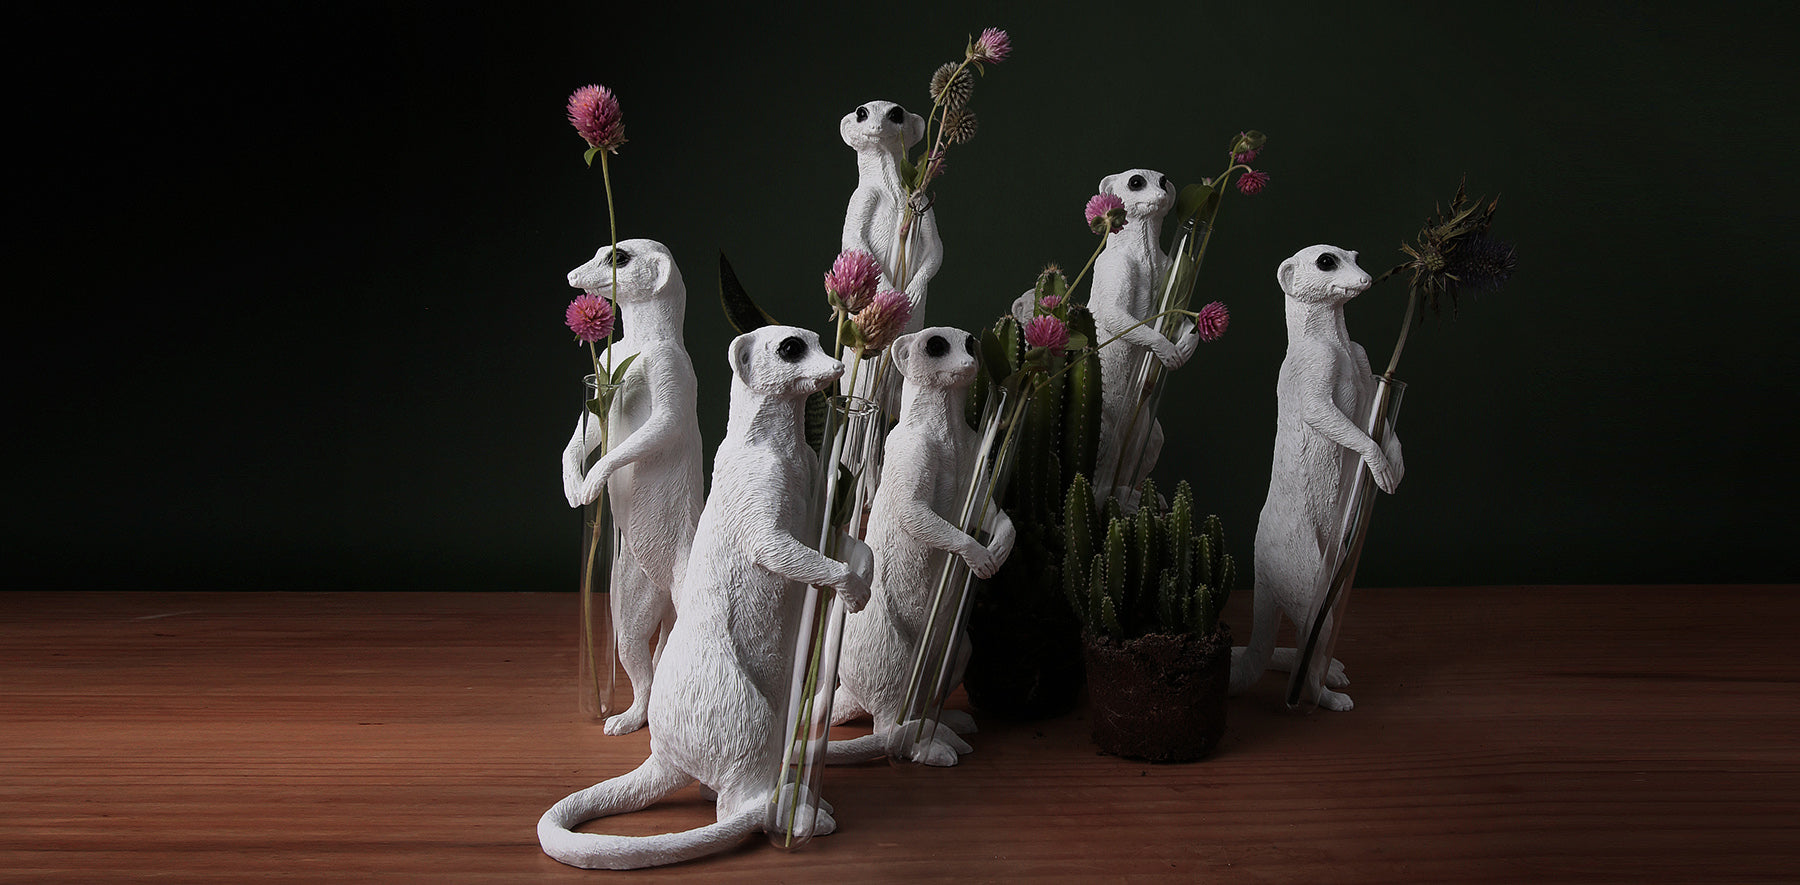 Magnificent Meerkat Ornaments: in vases and sculpture themes